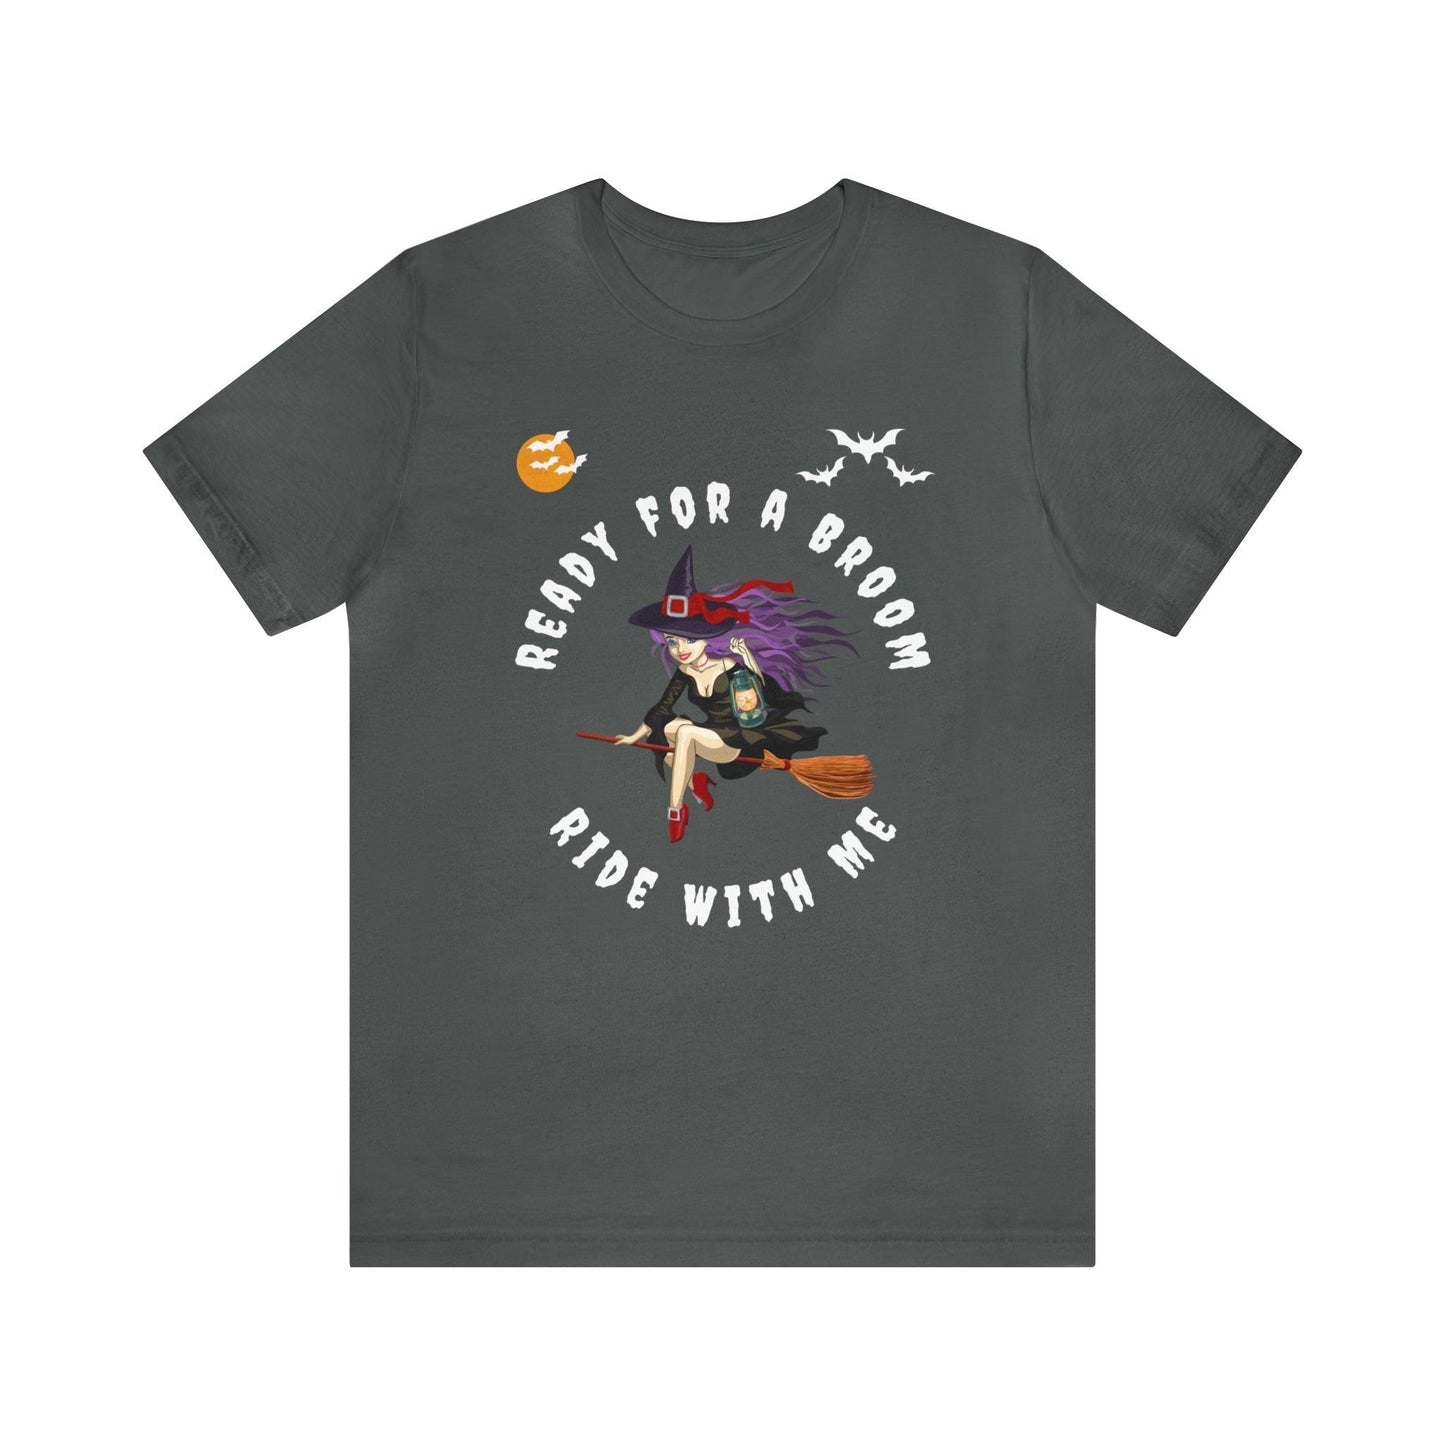 Ready for a Broom Ride with Me Halloween shirt, Witch shirt, Halloween tshirt, Halloween outfit, Work Halloween Costume